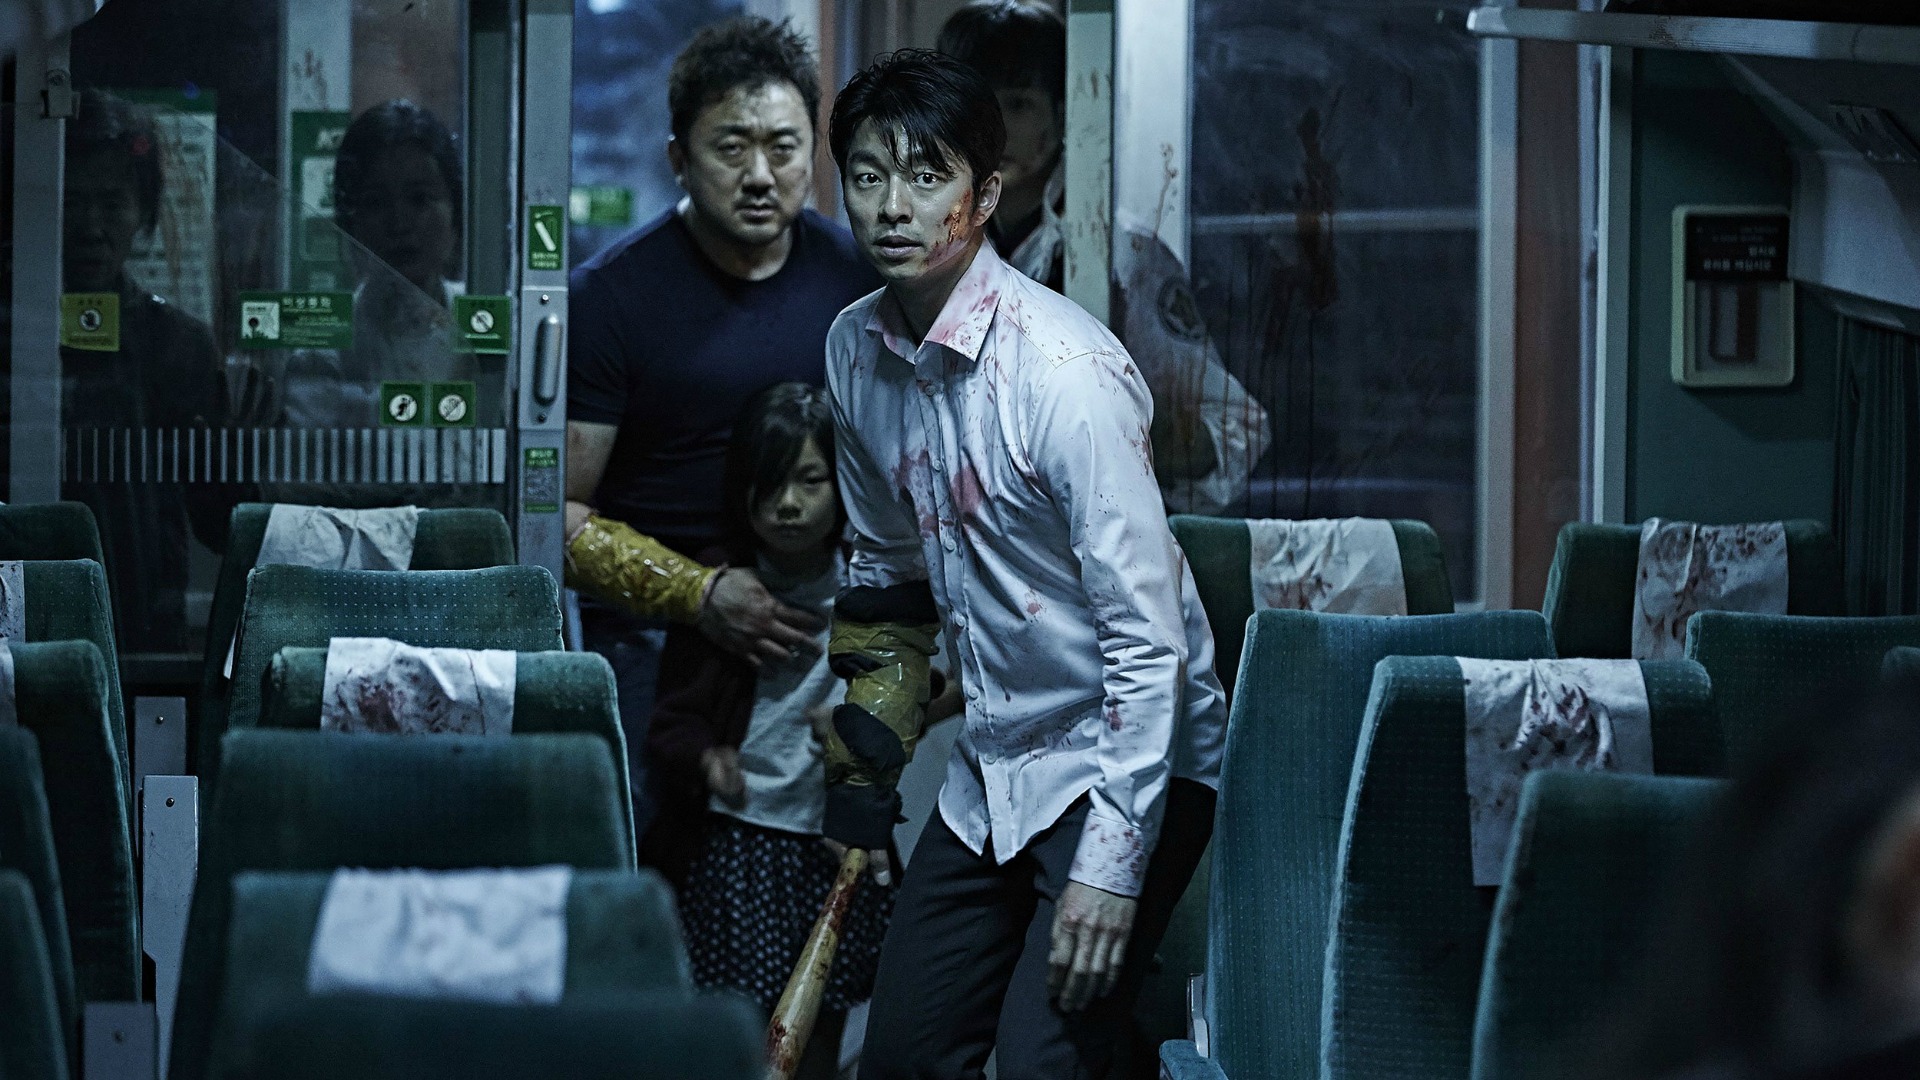 Things go off the rails in Train To Busan